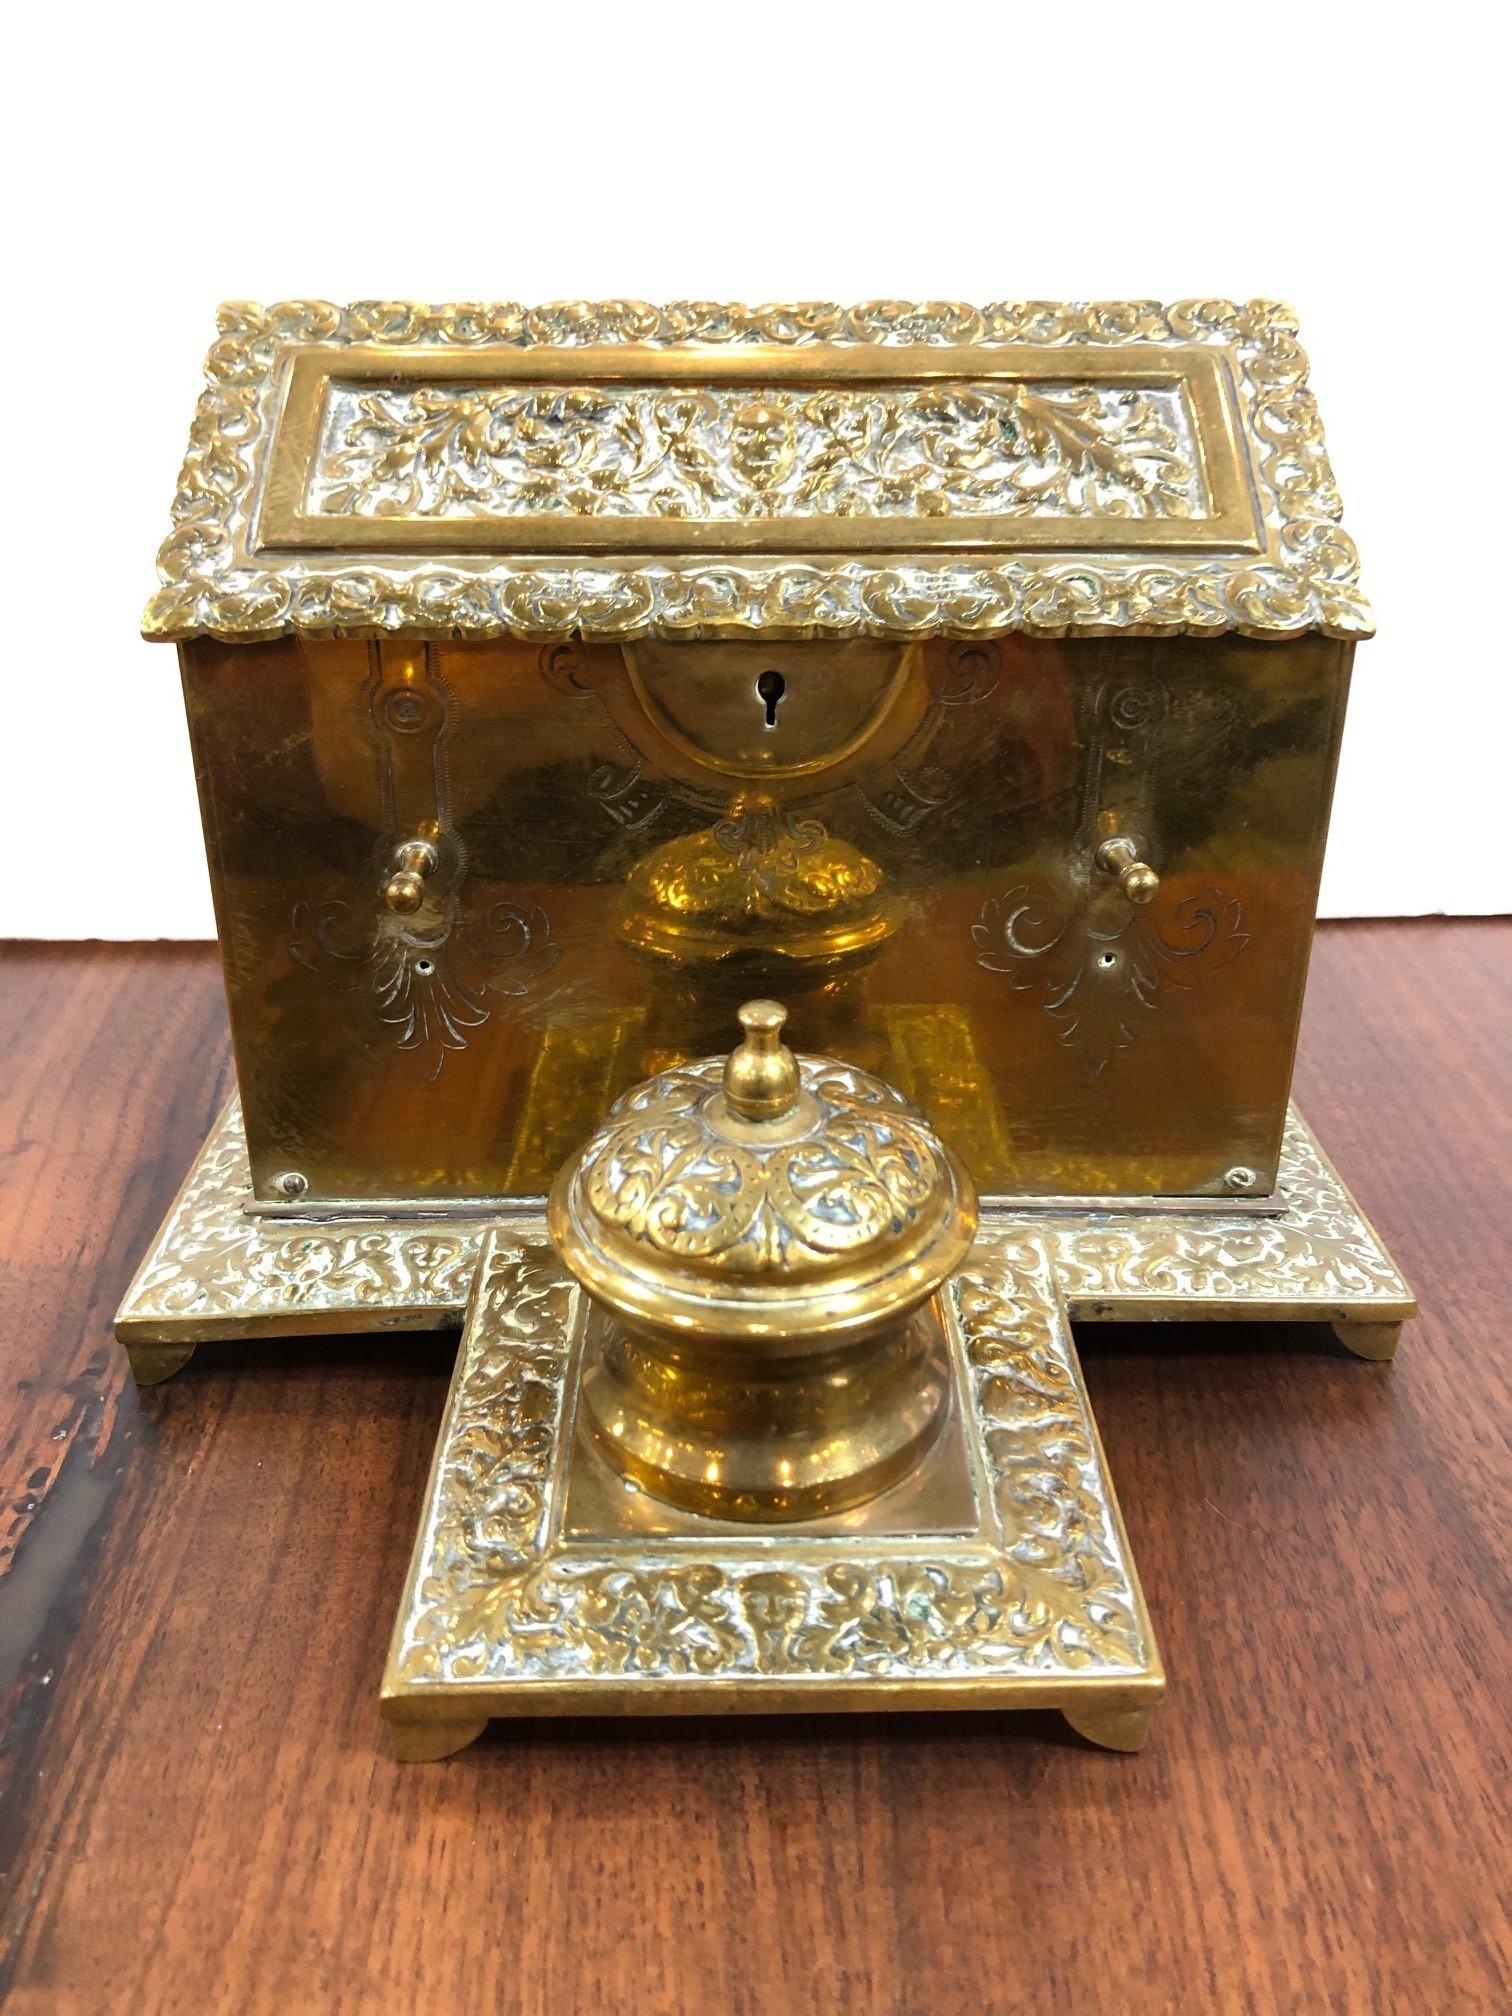 English Mid-19th Century Brass Stationary Box with Inkwell For Sale 1